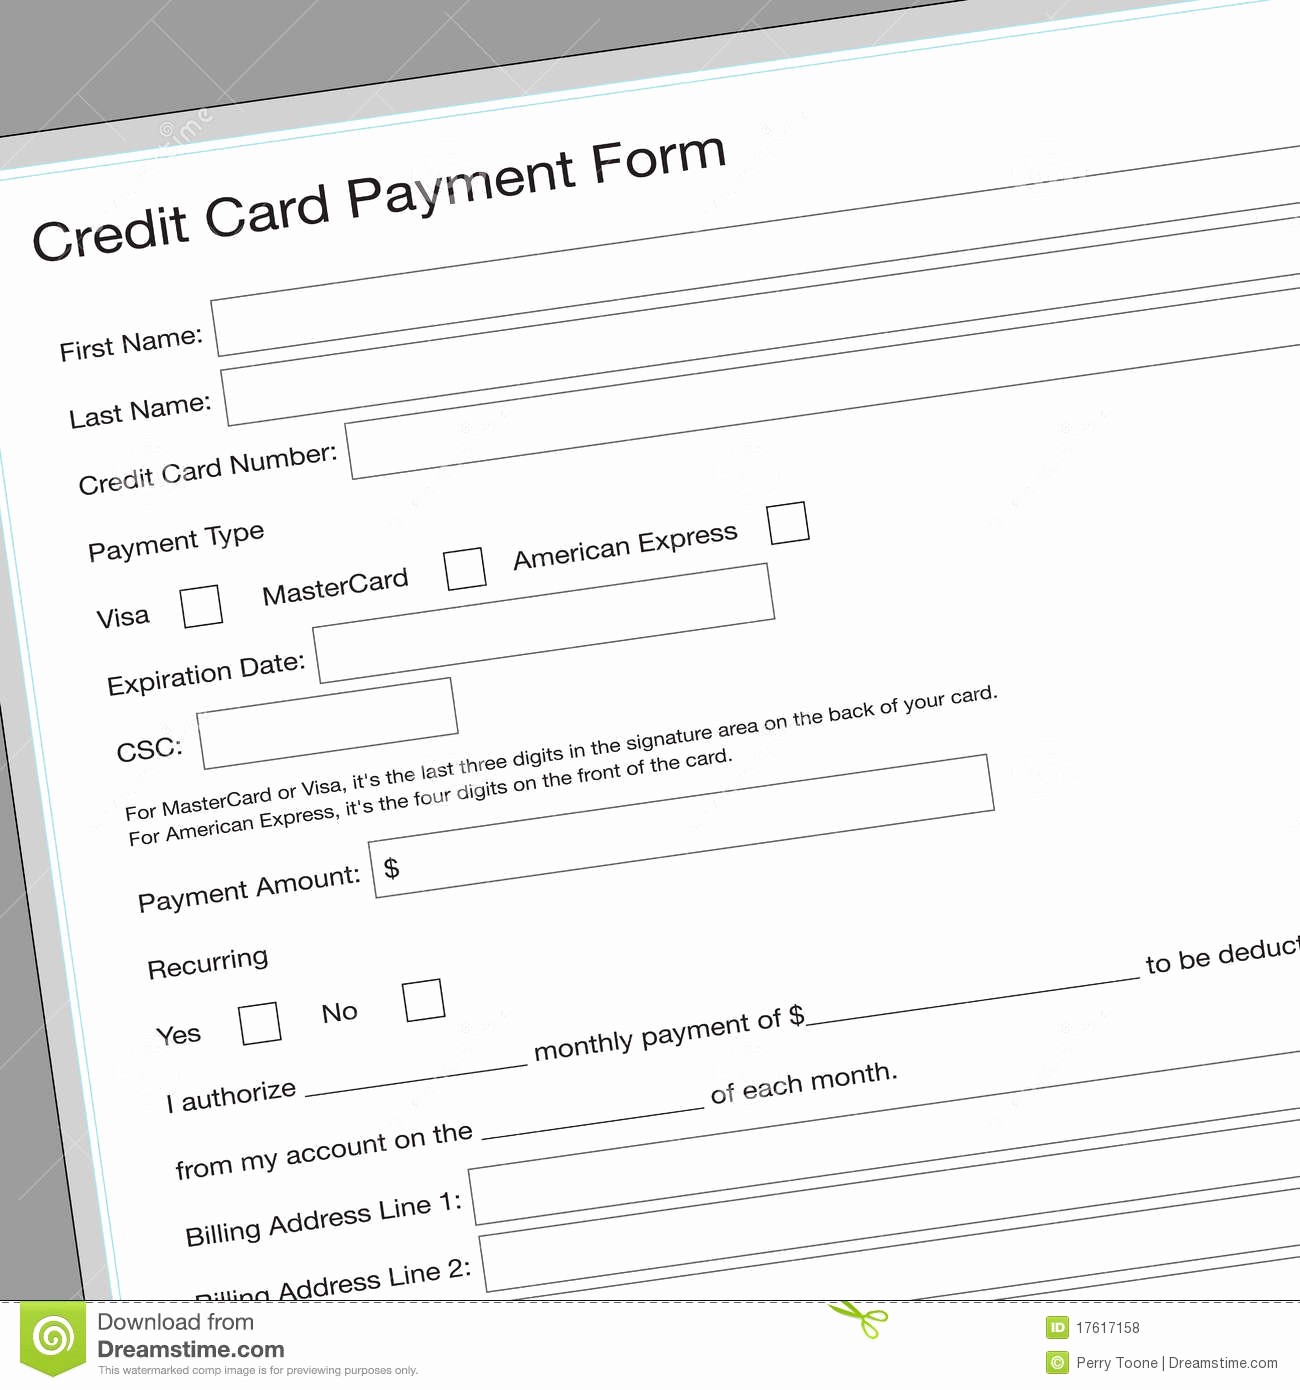 Credit Card Sign Out Sheet Unique Credit Card Application form Royalty Free Stock S